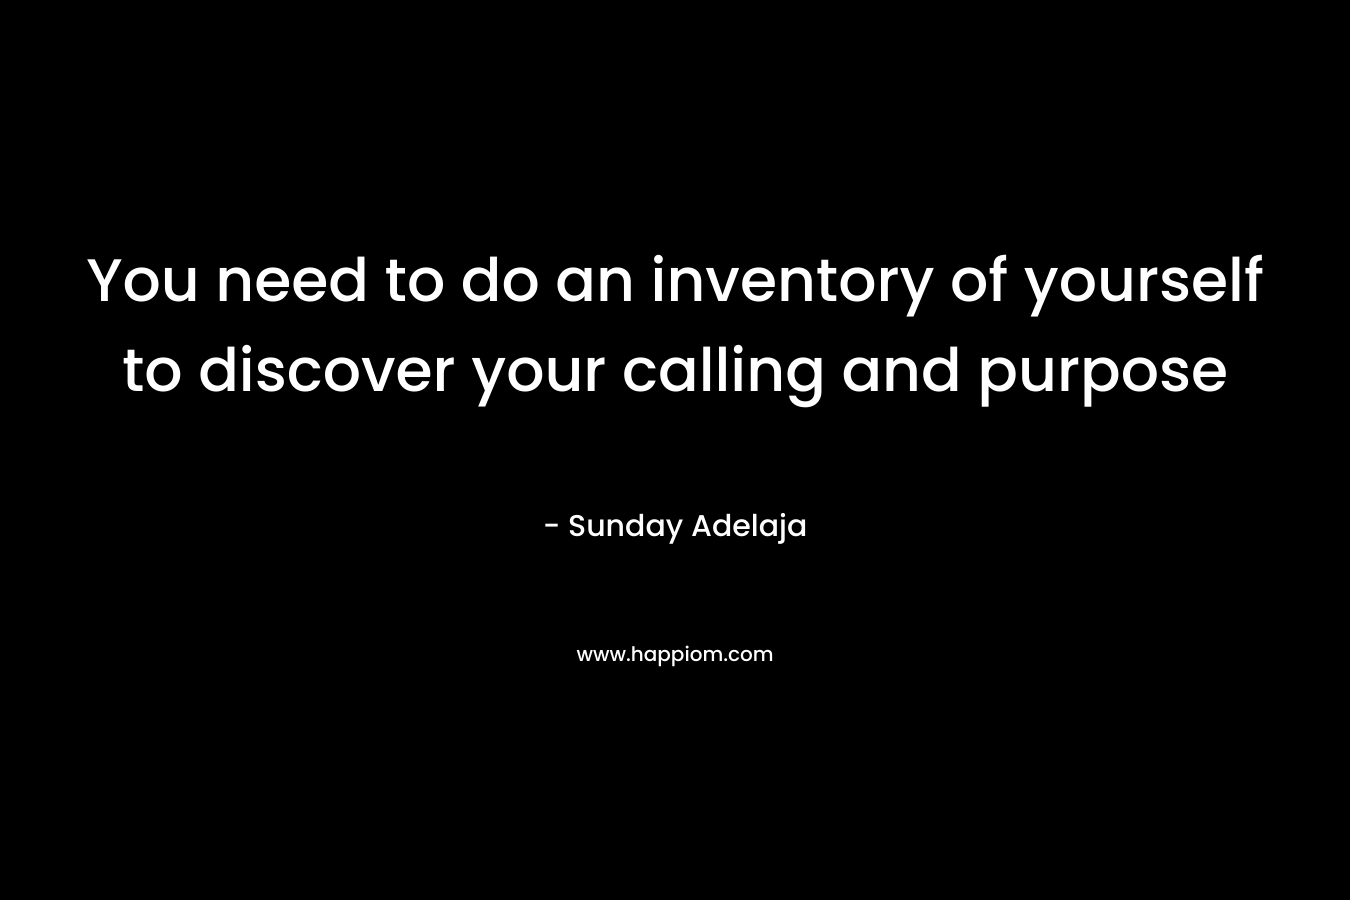 You need to do an inventory of yourself to discover your calling and purpose